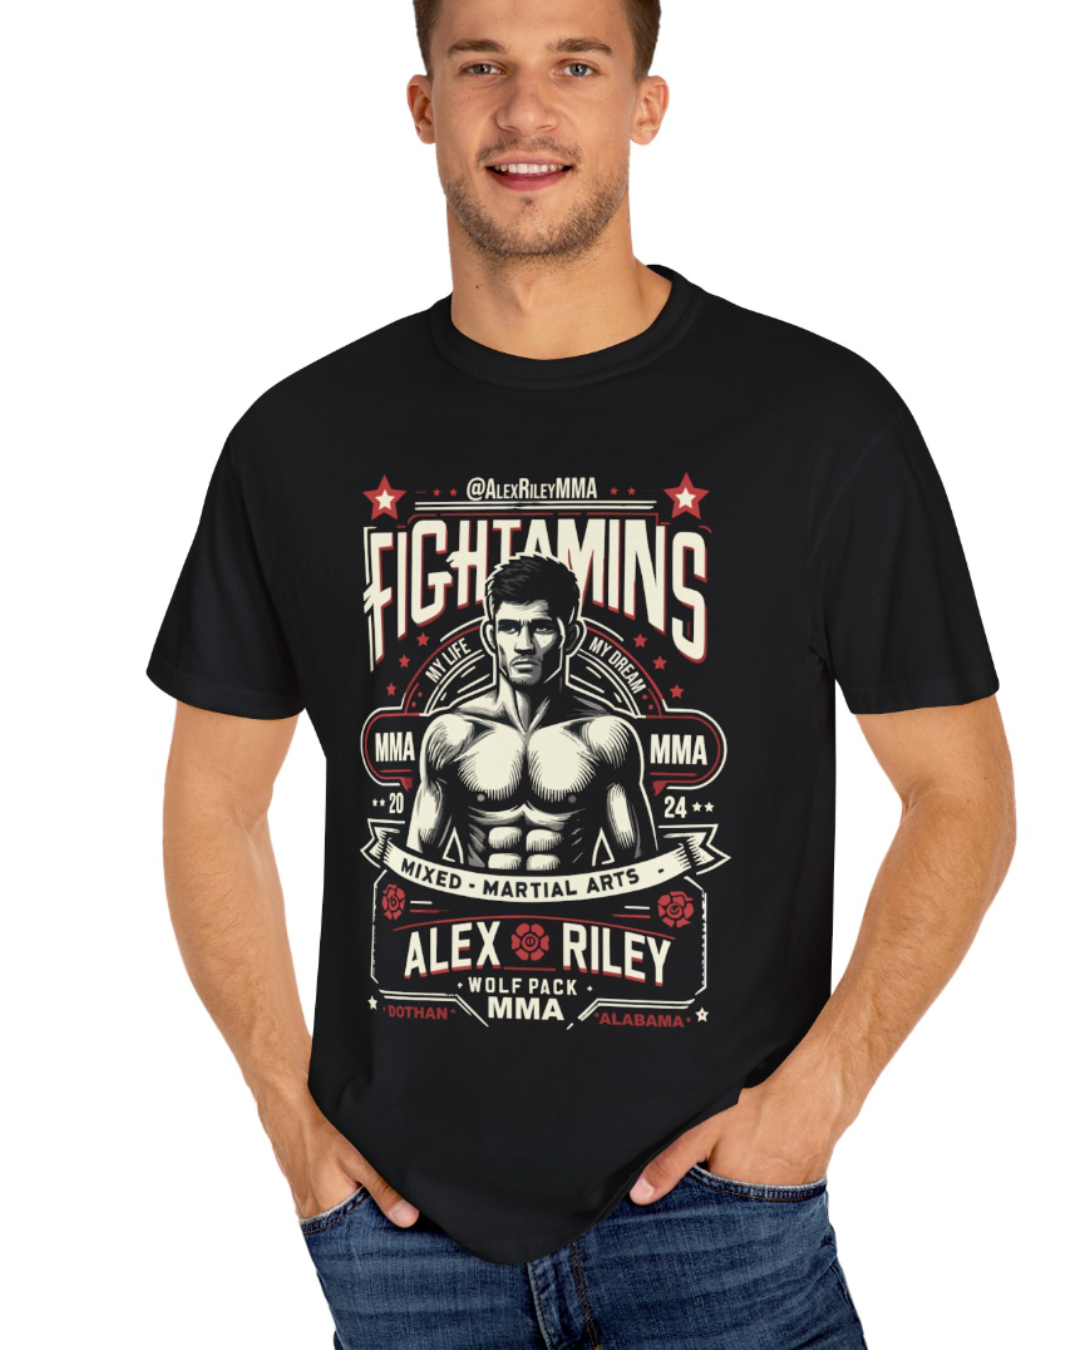 Join Team Riley: Get the Exclusive Alex Riley Walkout Tee